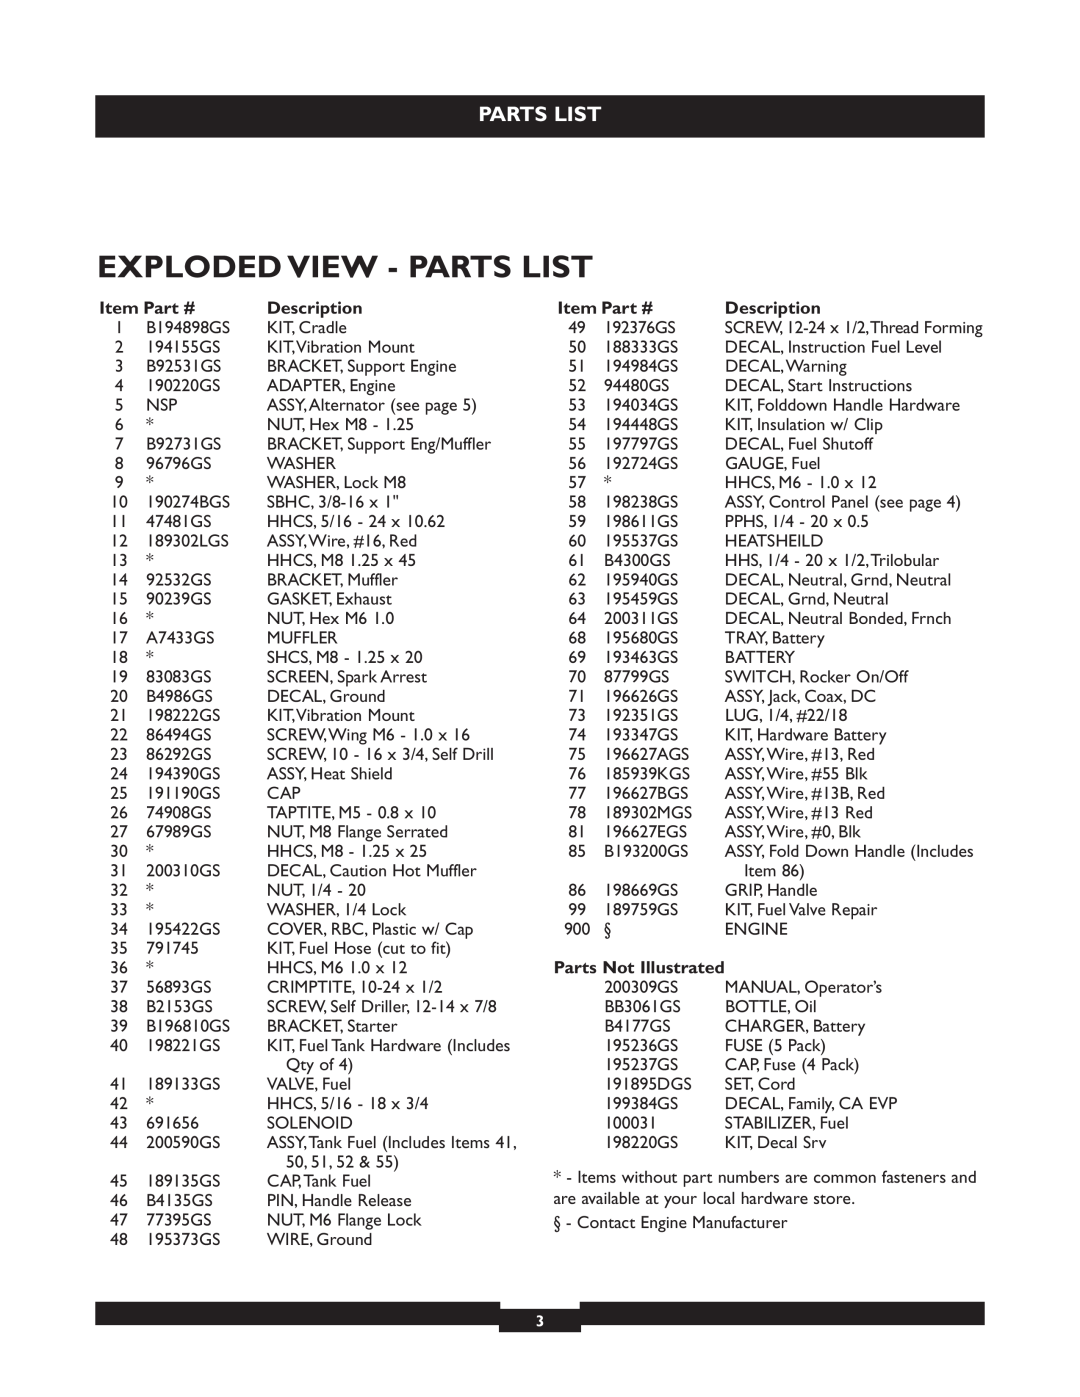 Briggs & Stratton 30254 manual Exploded View - Parts List, Description, Parts Not Illustrated 